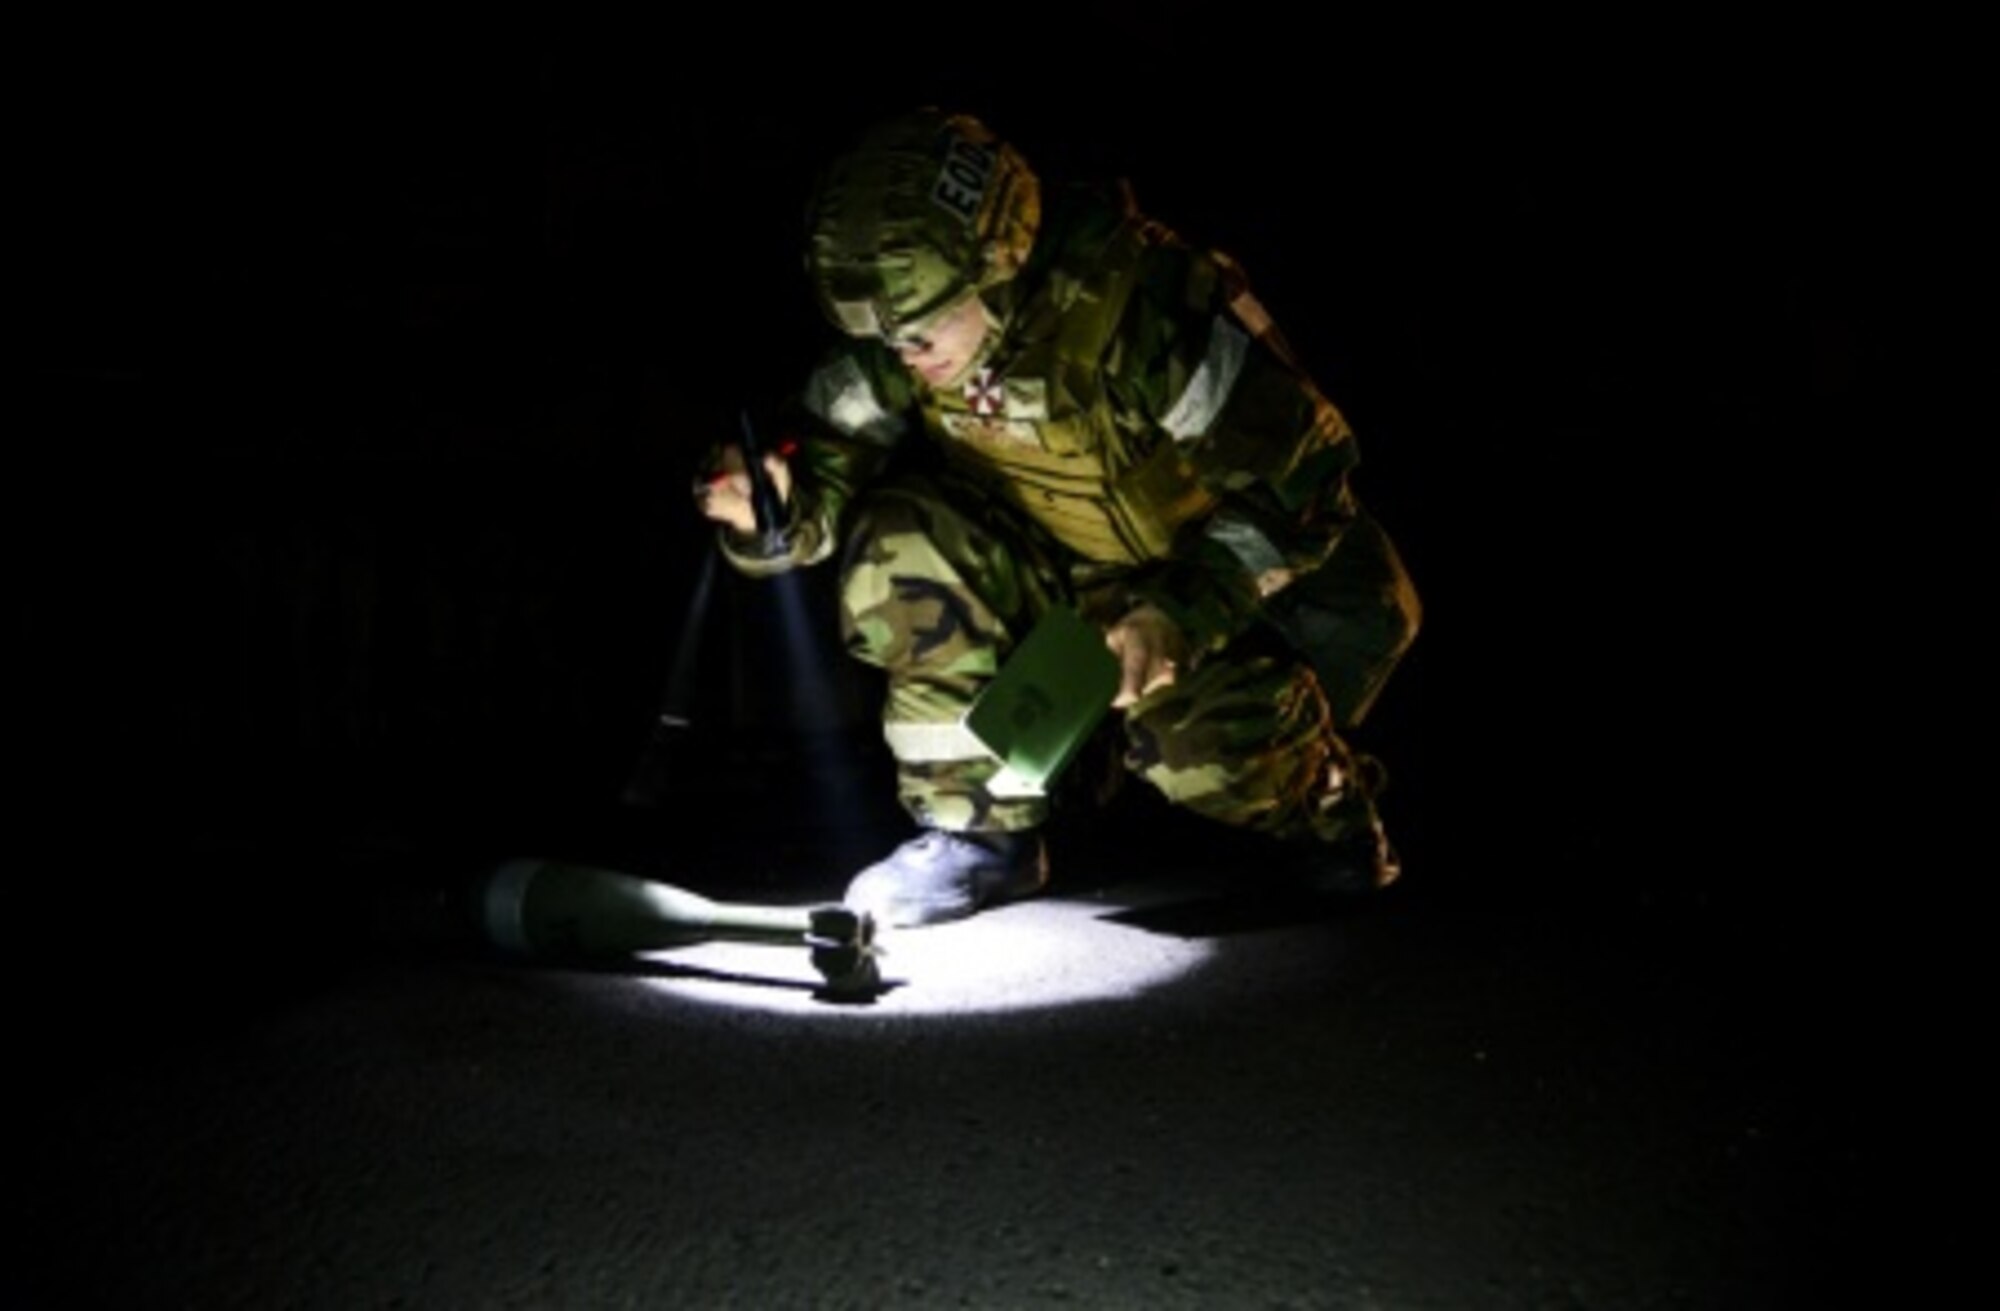 Airman 1st Class James Boyce, a 51st Civil Engineer Squadron explosive ordnance disposal technician, inspects a simulated unexploded mortar round during a training scenario at Osan Air Base, South Korea, Nov. 6, 2015. EOD Airmen inspect UXOs to accurately determine the best way to either correctly disarm or detonate them in a controlled environment. (U.S. Air Force photo/Tech. Sgt. Travis Edwards)